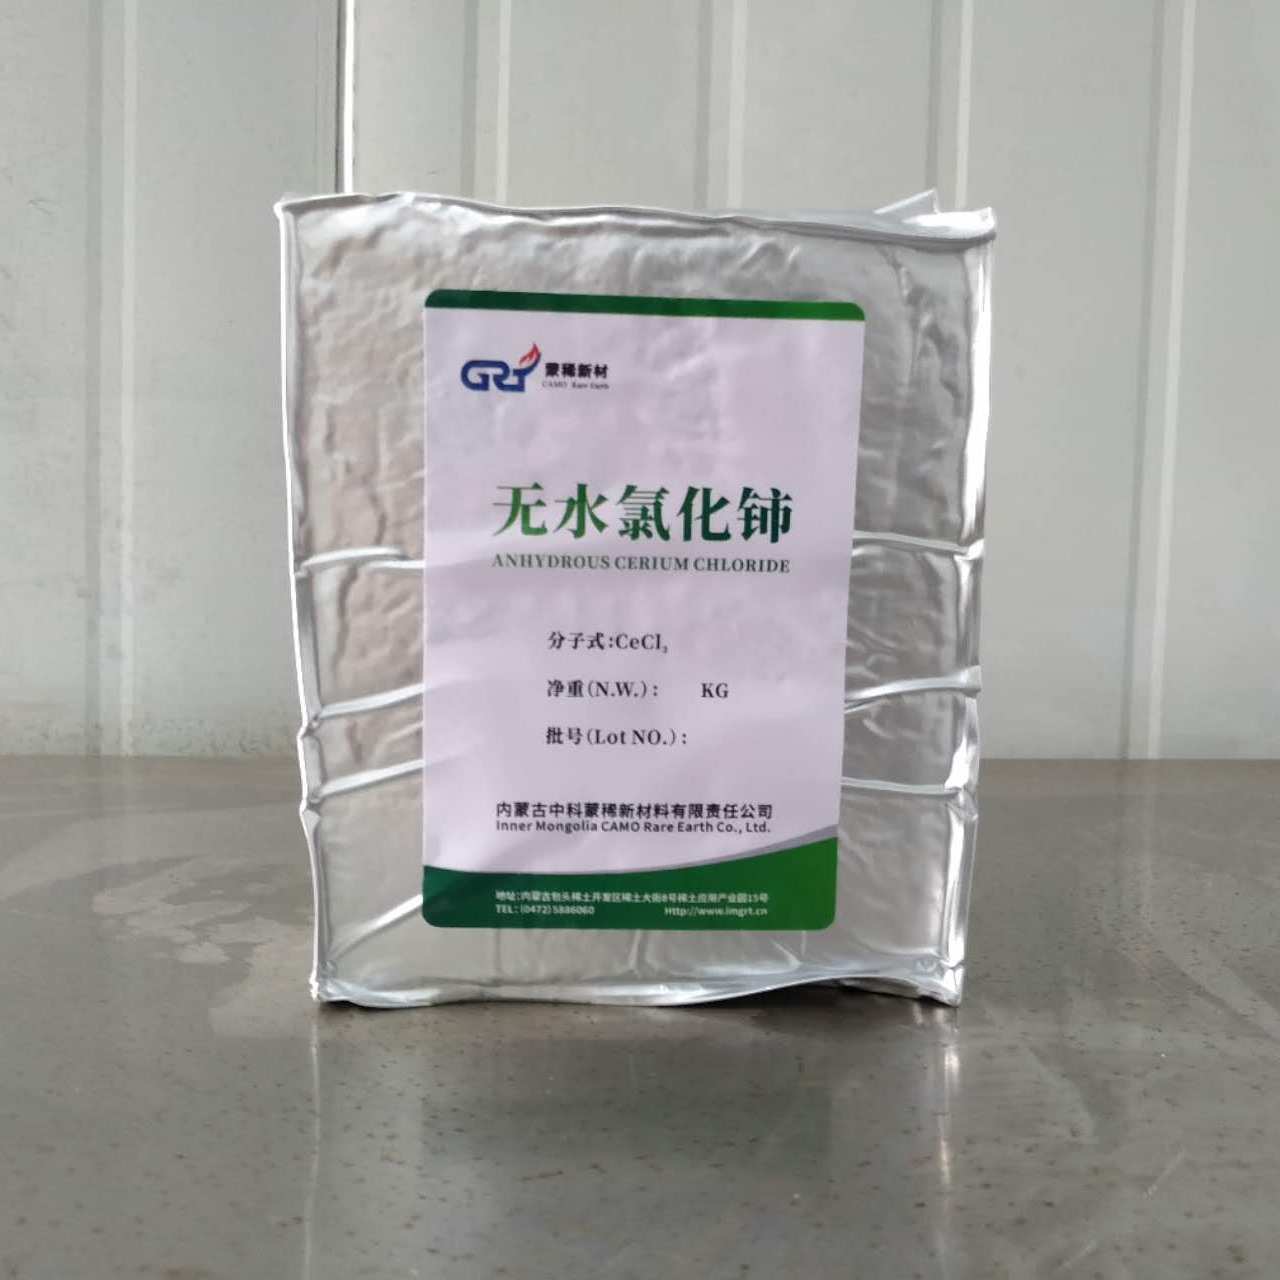 Cerium chloride anhydrous